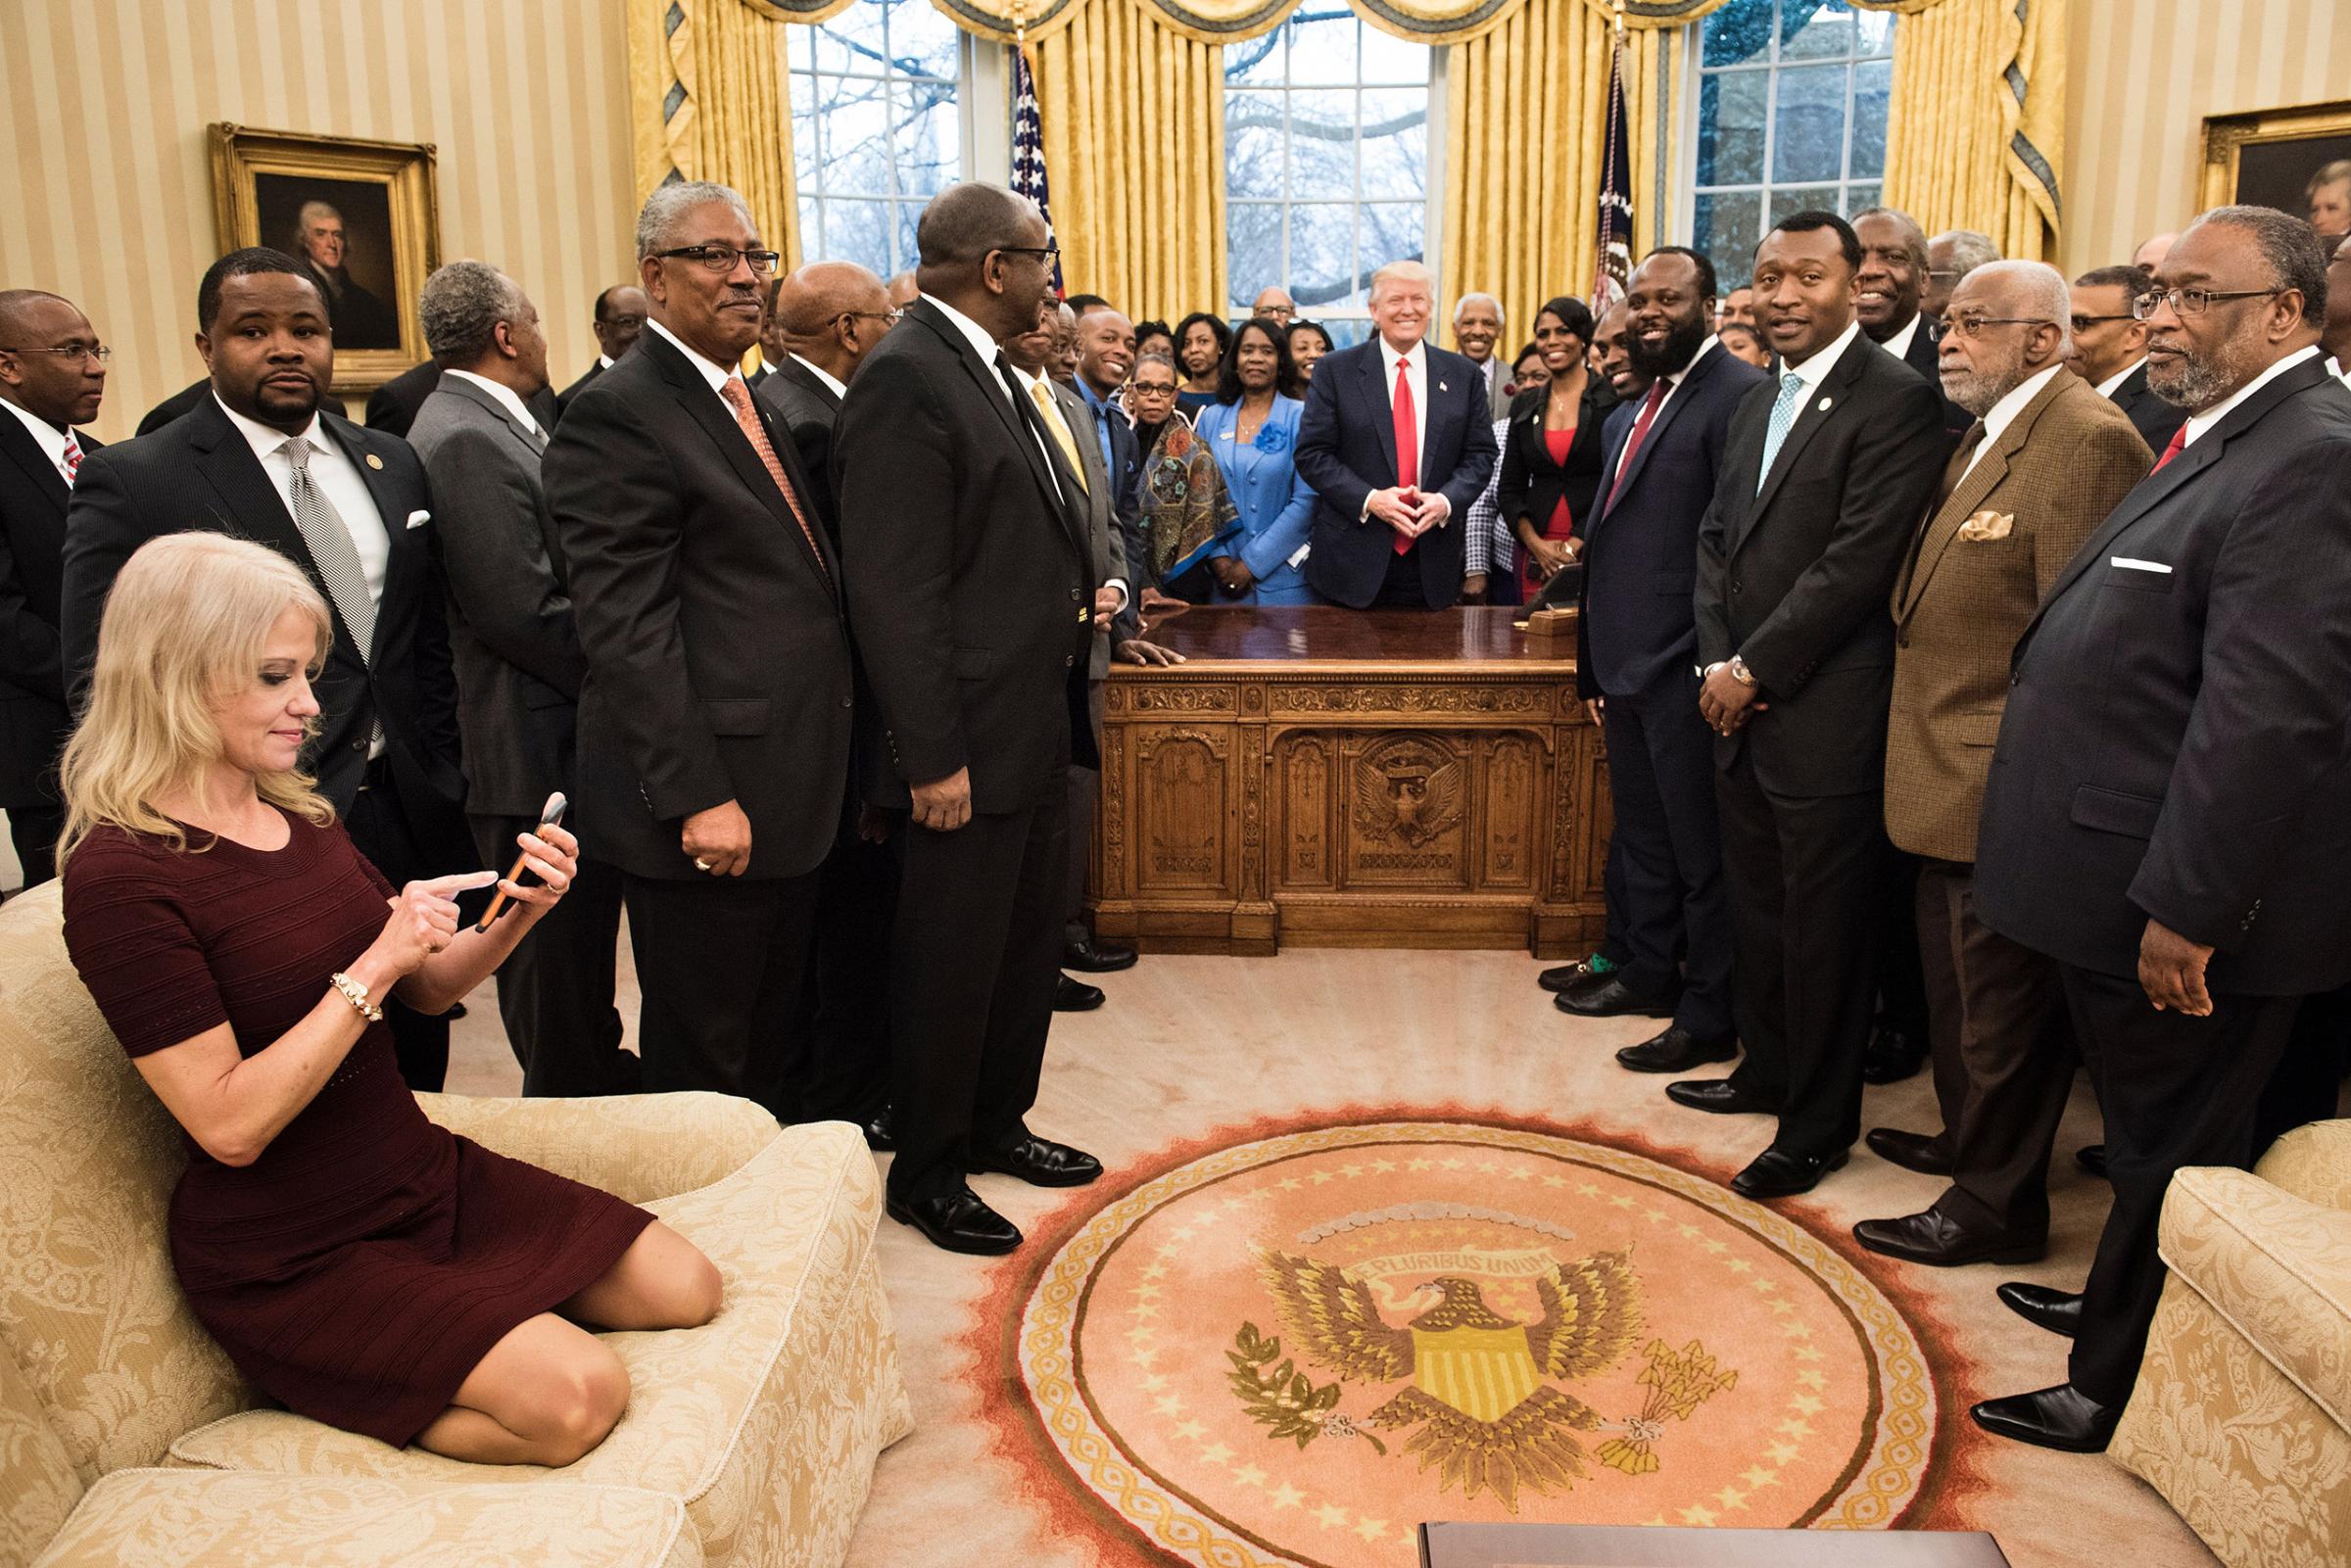 Counselor to the President Kellyanne Conway (L) checks her phone after taking a photo as US President Donald Trump and leaders of historically black universities and colleges pose for a group photo in the Oval Office of the White House in Washington, DC on February 27, 2017.